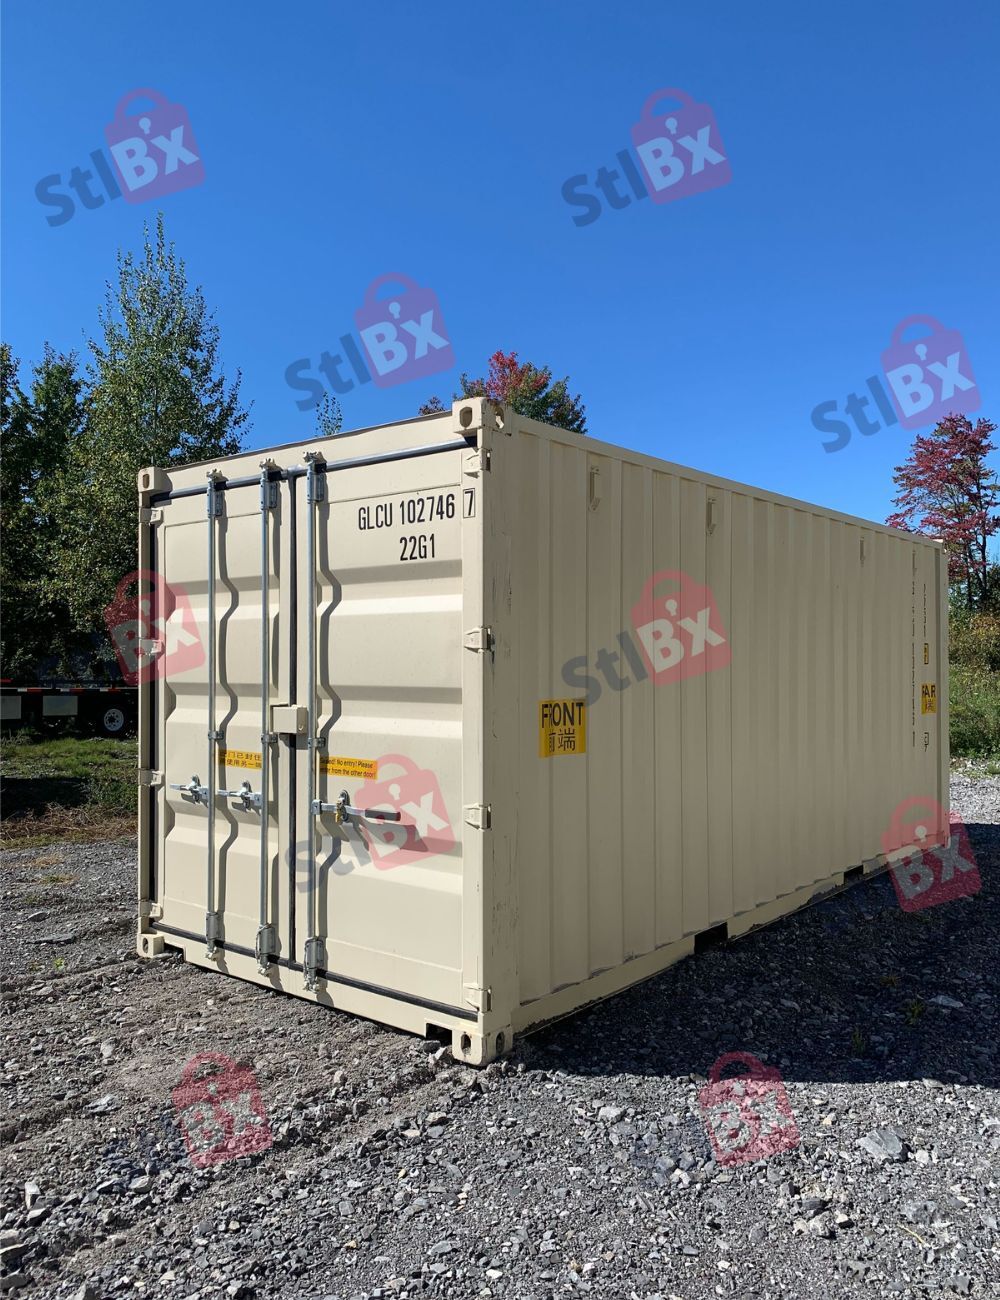 New 20-foot Shipping Container with Double Doors in Toronto, Ontario